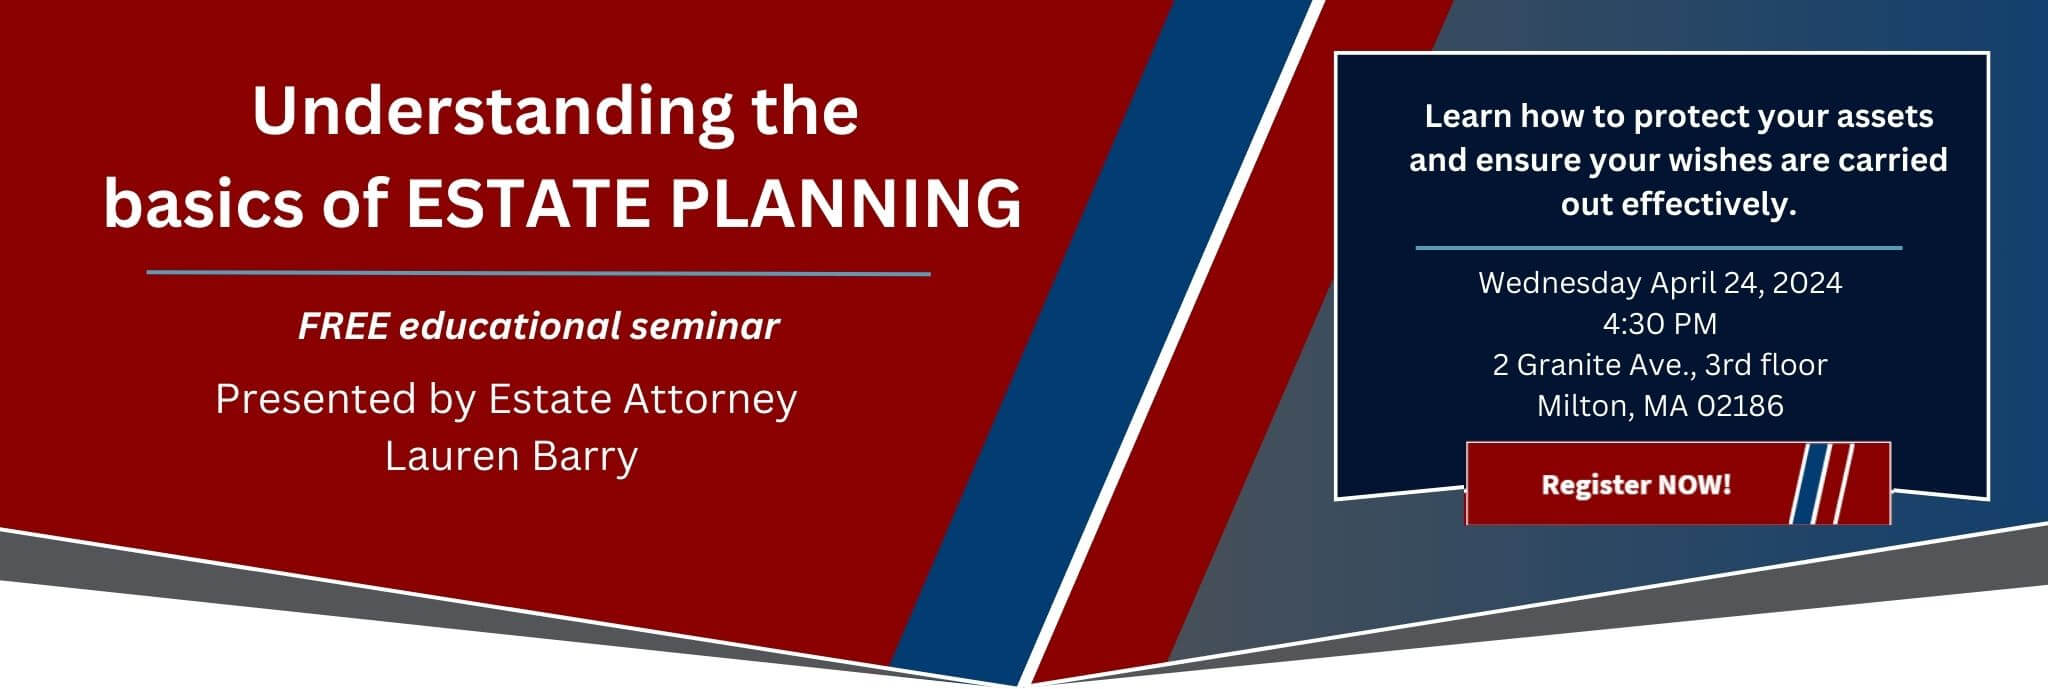 Join us for a FREE seminar on the basics of estate planning with estate attorney Lauren Barry Wednesday April 24th at 430 PM 2 granite ave floor 3 in Milton MAmilton